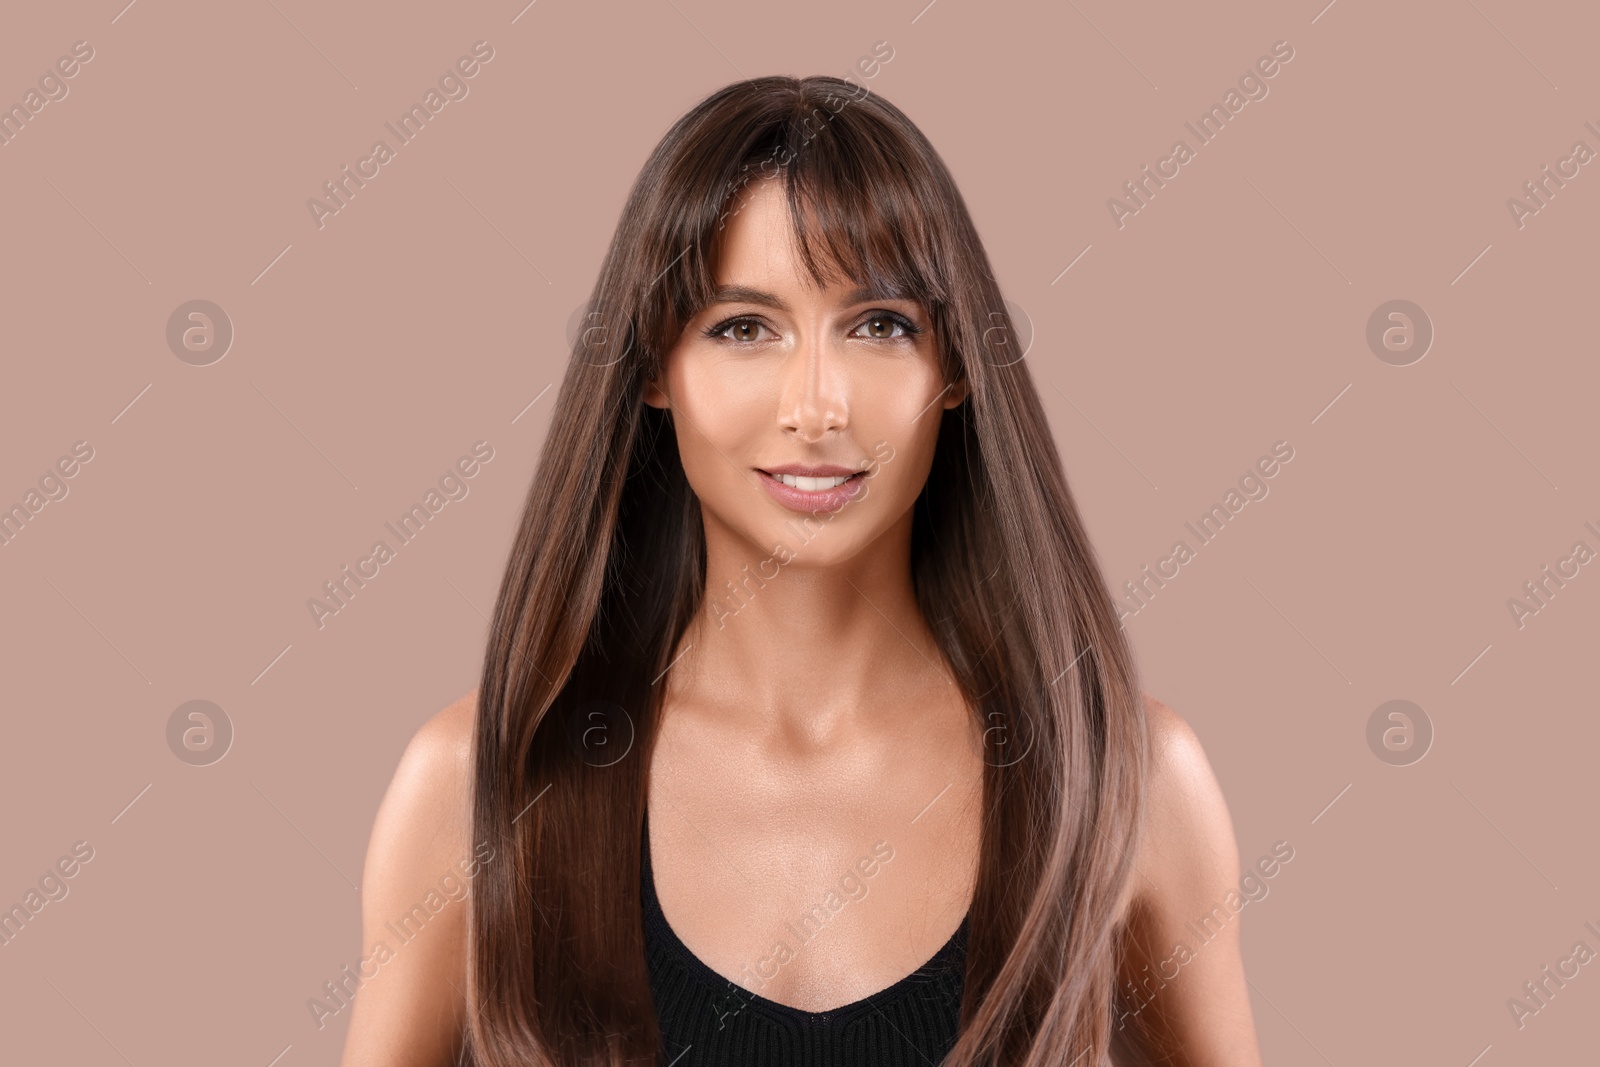 Photo of Hair styling. Portrait of beautiful woman with straight long hair on pale brown background